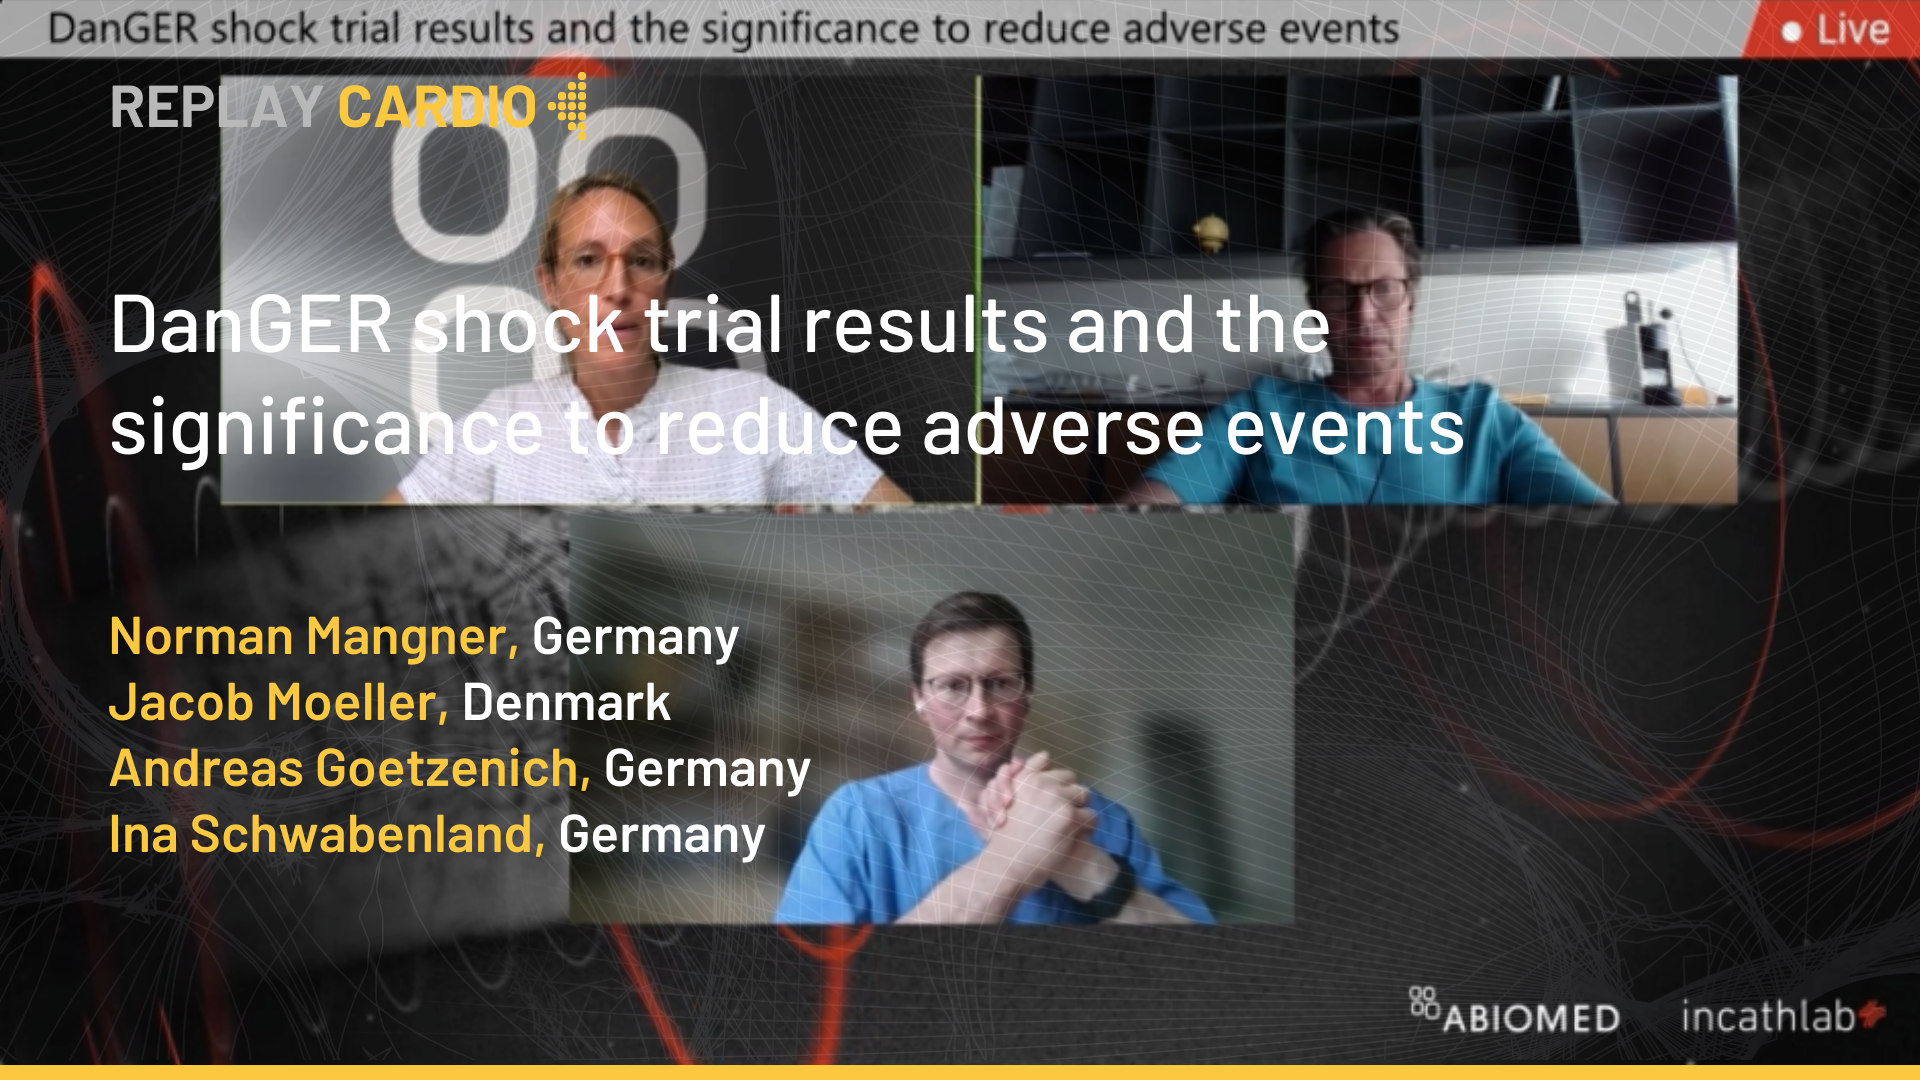 DanGER shock trial results and the significance to reduce adverse events